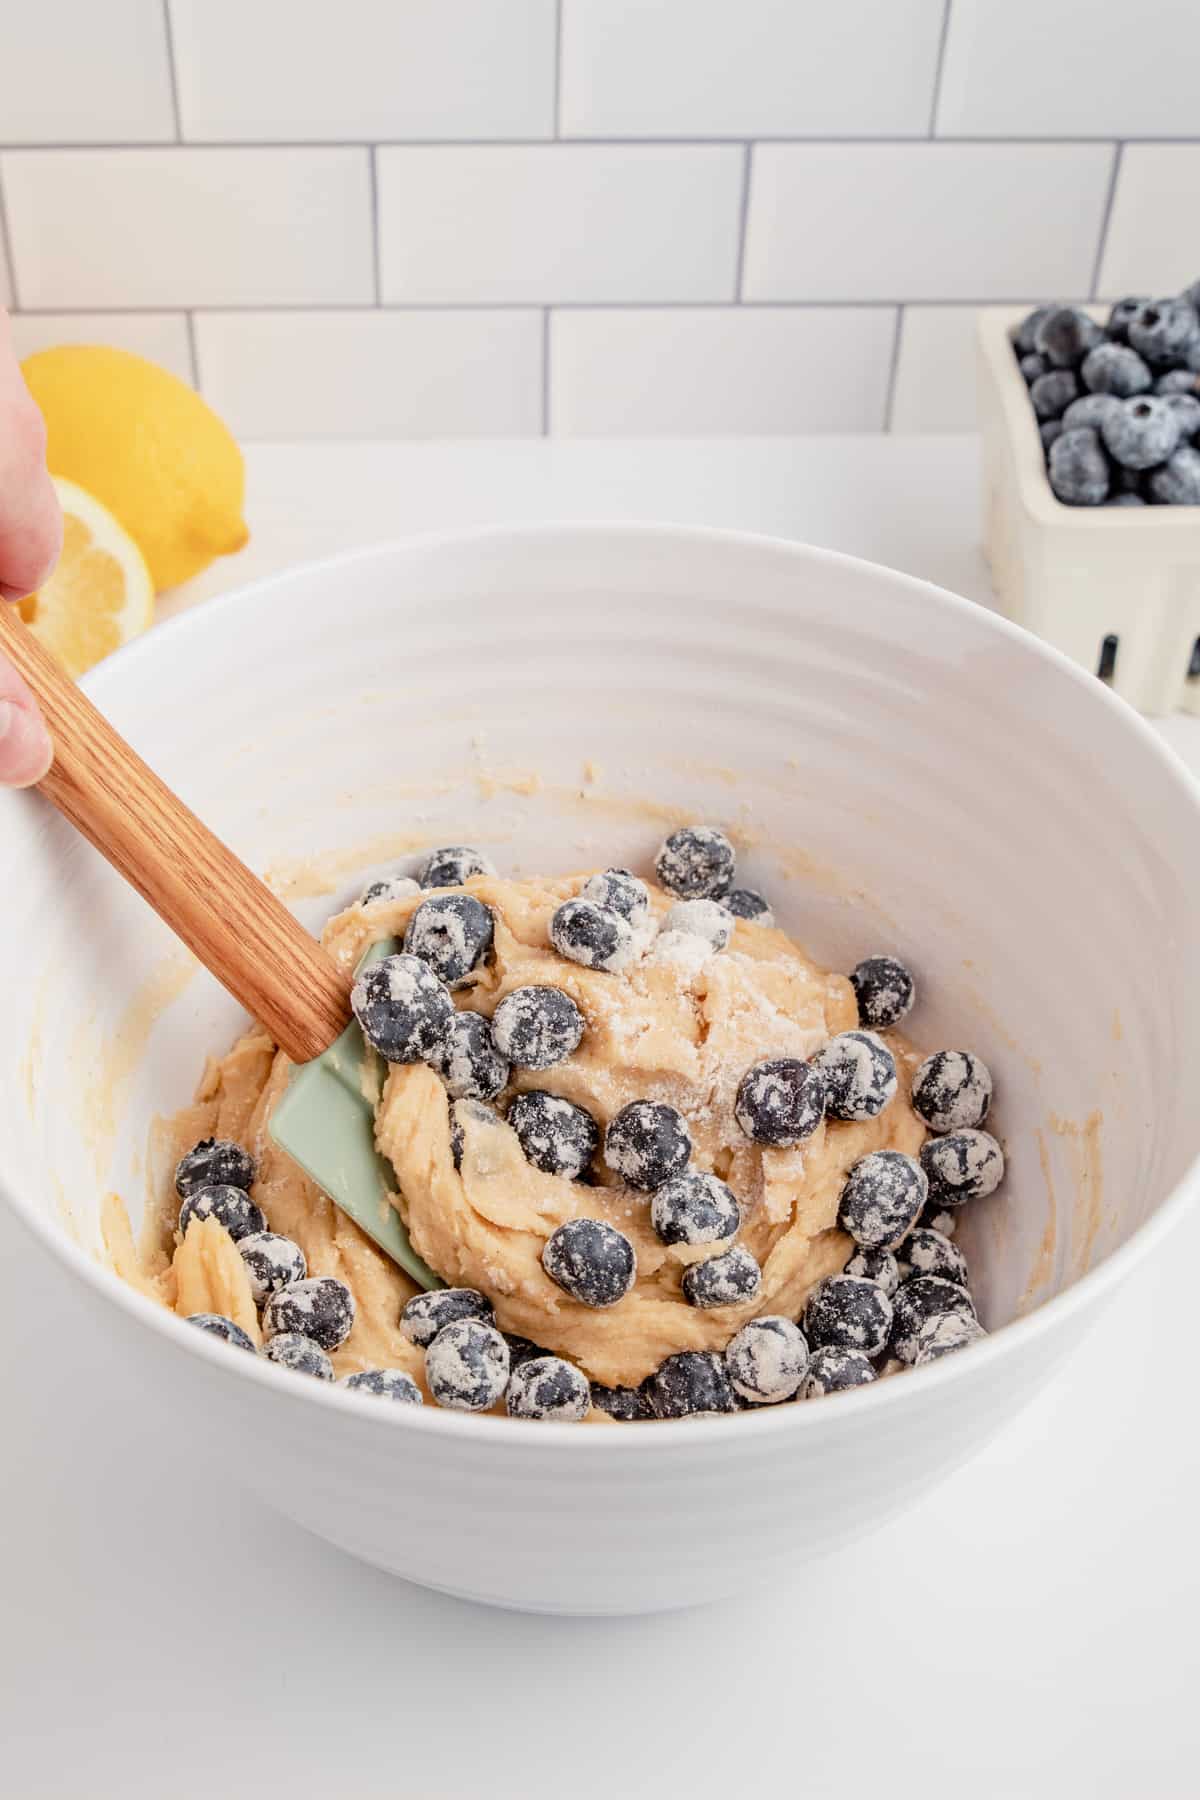 Loaf batter being mixed with fresh blueberries in a mixing bowl.